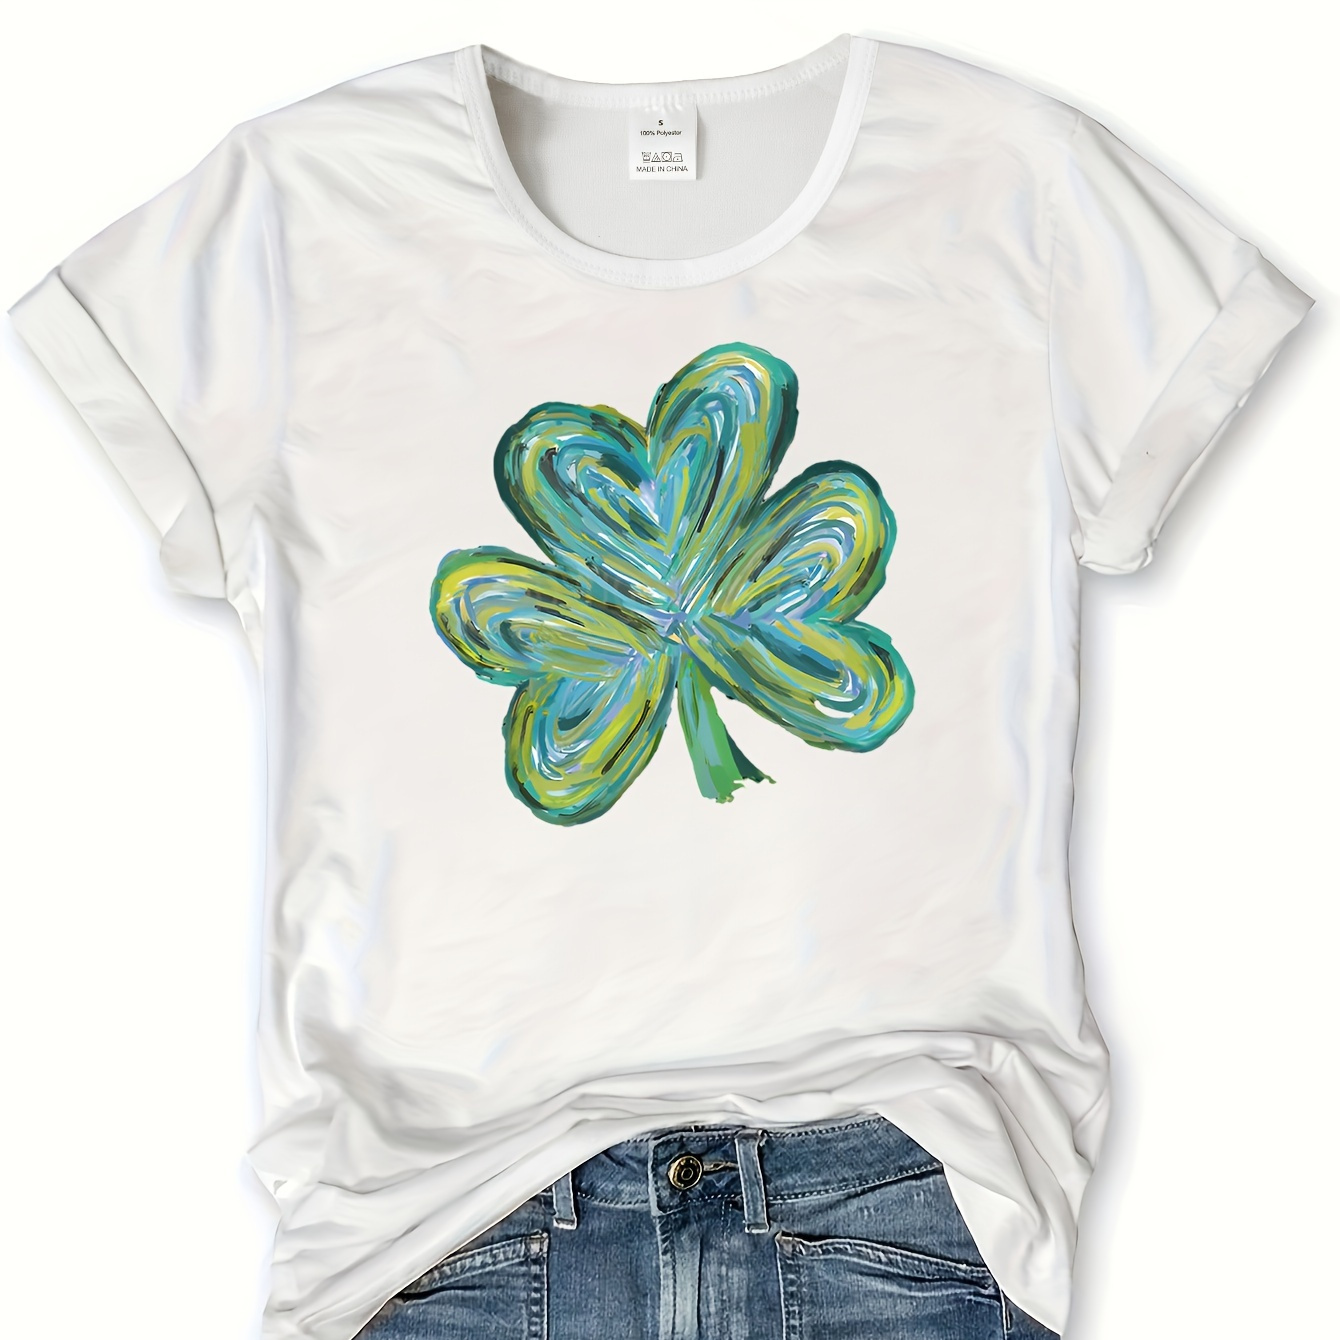 

Clover Graphic Print T-shirt, Short Sleeve Crew Neck Casual Top For Summer & Spring, Women's Clothing